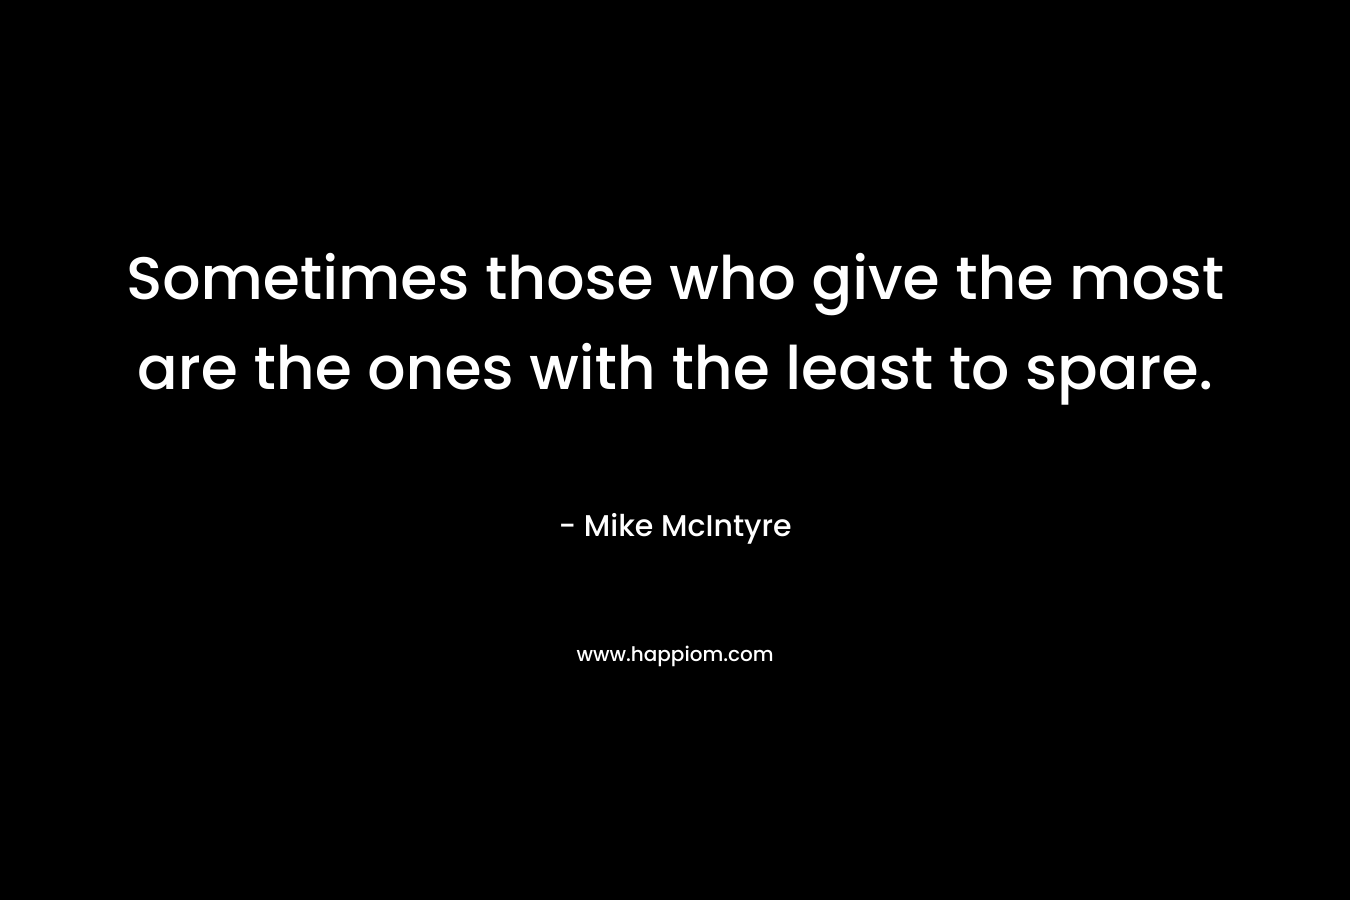 Sometimes those who give the most are the ones with the least to spare.